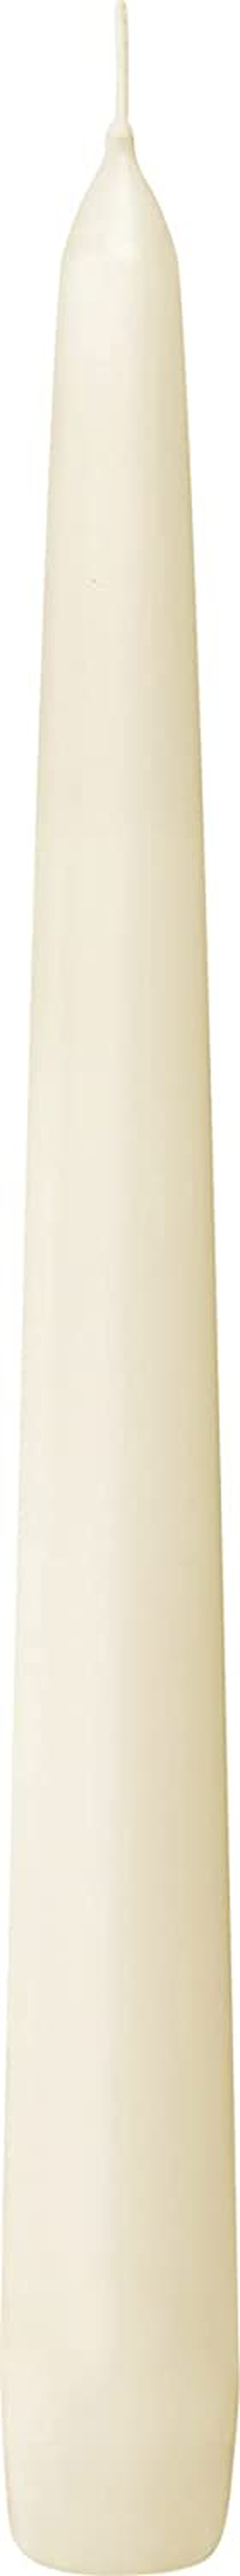 BOLSIUS Long Household Ivory Taper Candles - 10-inch Unscented Premium Quality Wax - 7 Hour Long Burning Dripless Candles Bulk Pack of 100 for Home Decor, Wedding, Parties and Special Occasions